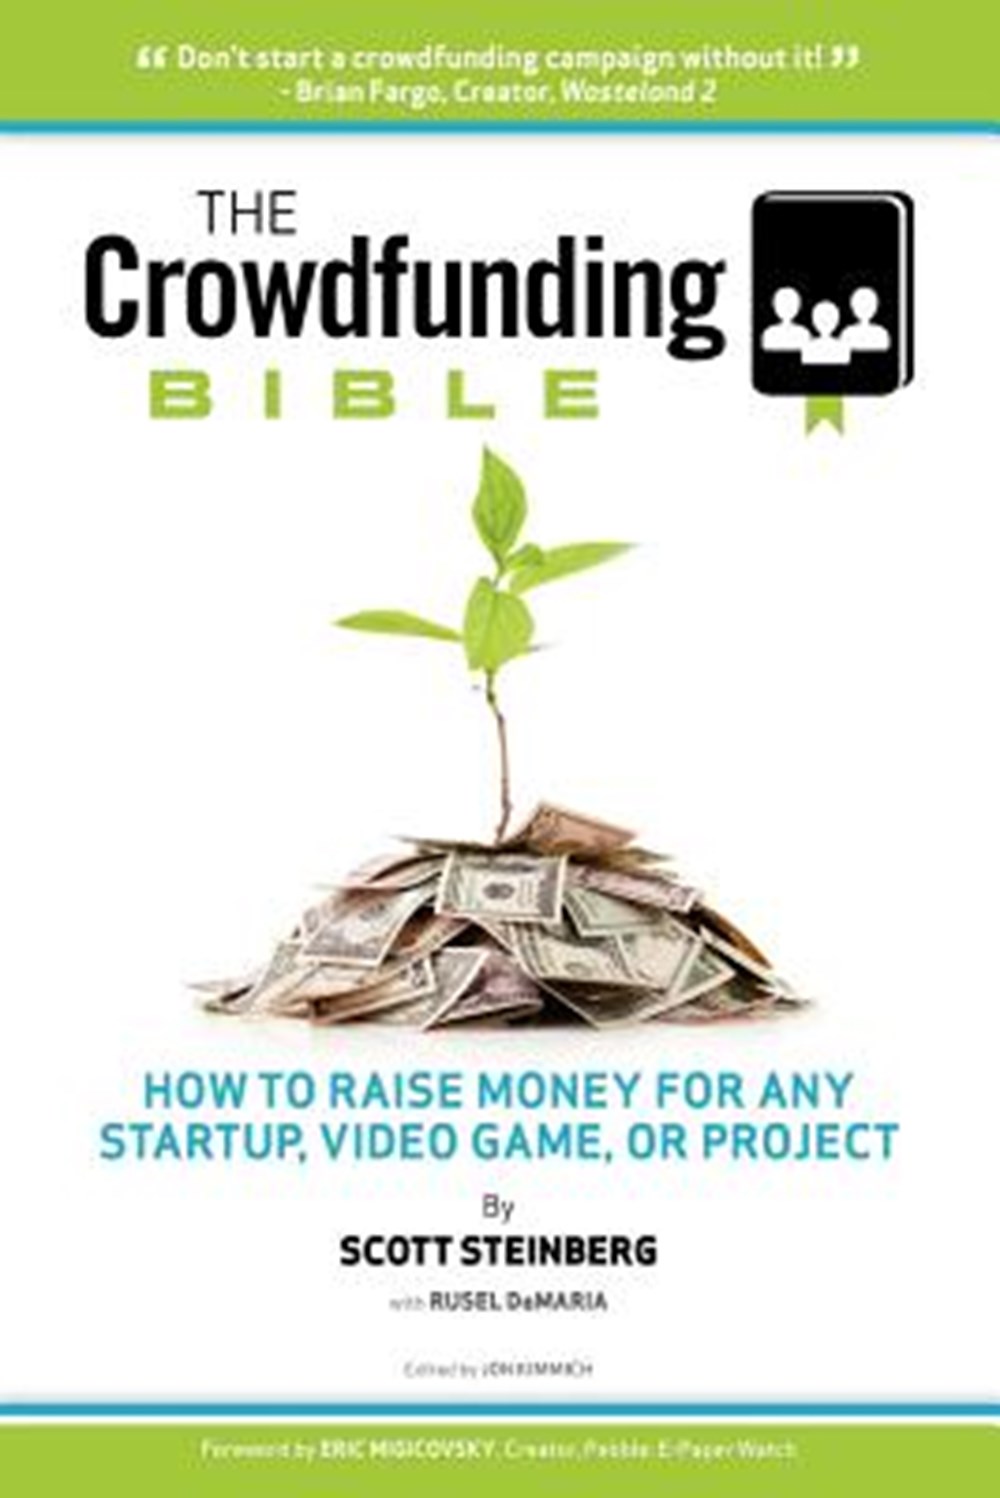 Crowdfunding Bible How to Raise Money for Any Startup, Video Game or Project